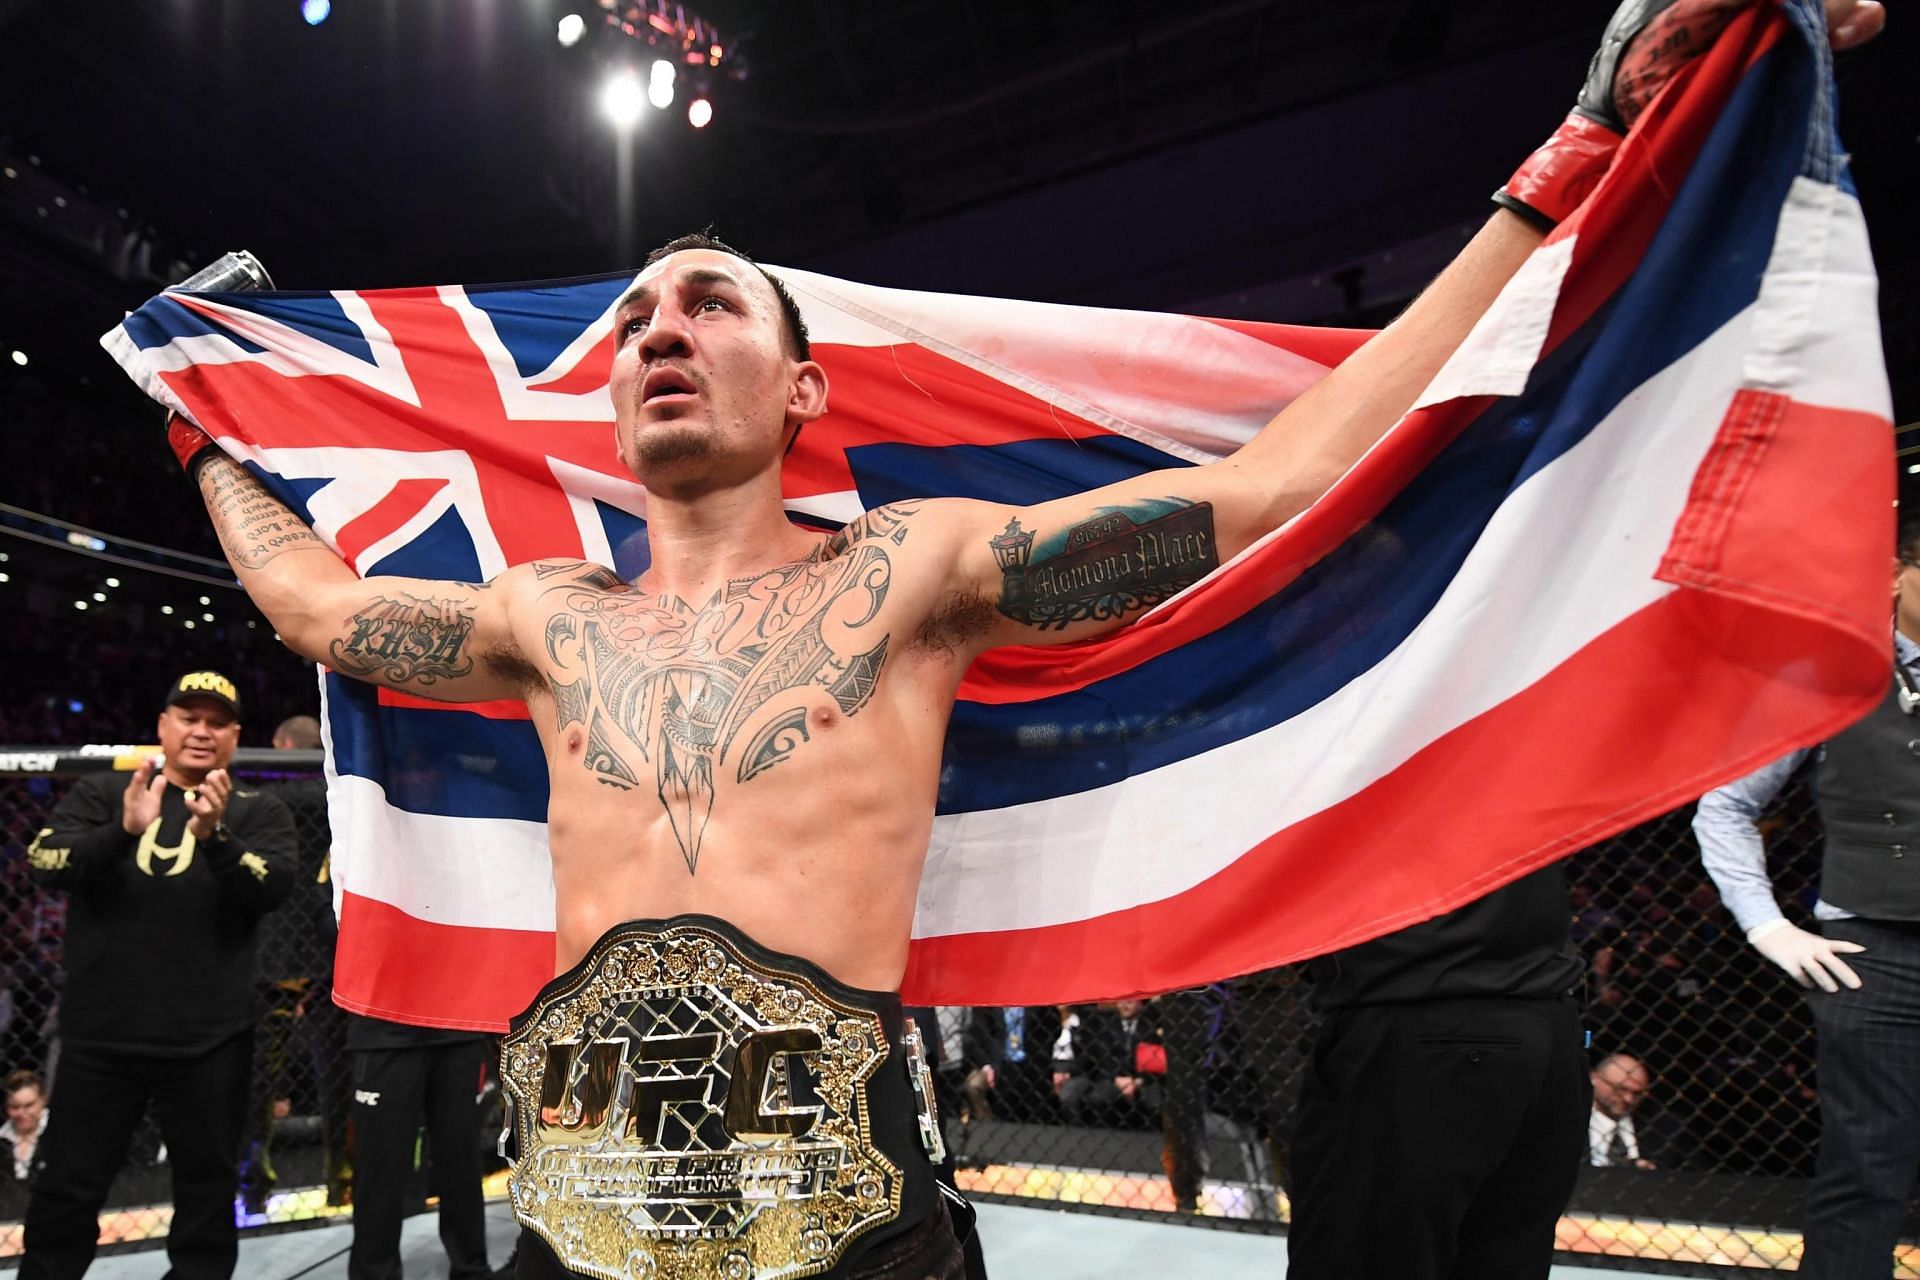 Max Holloway captured the interim UFC featherweight title in 2016 and then went onto dominate the division